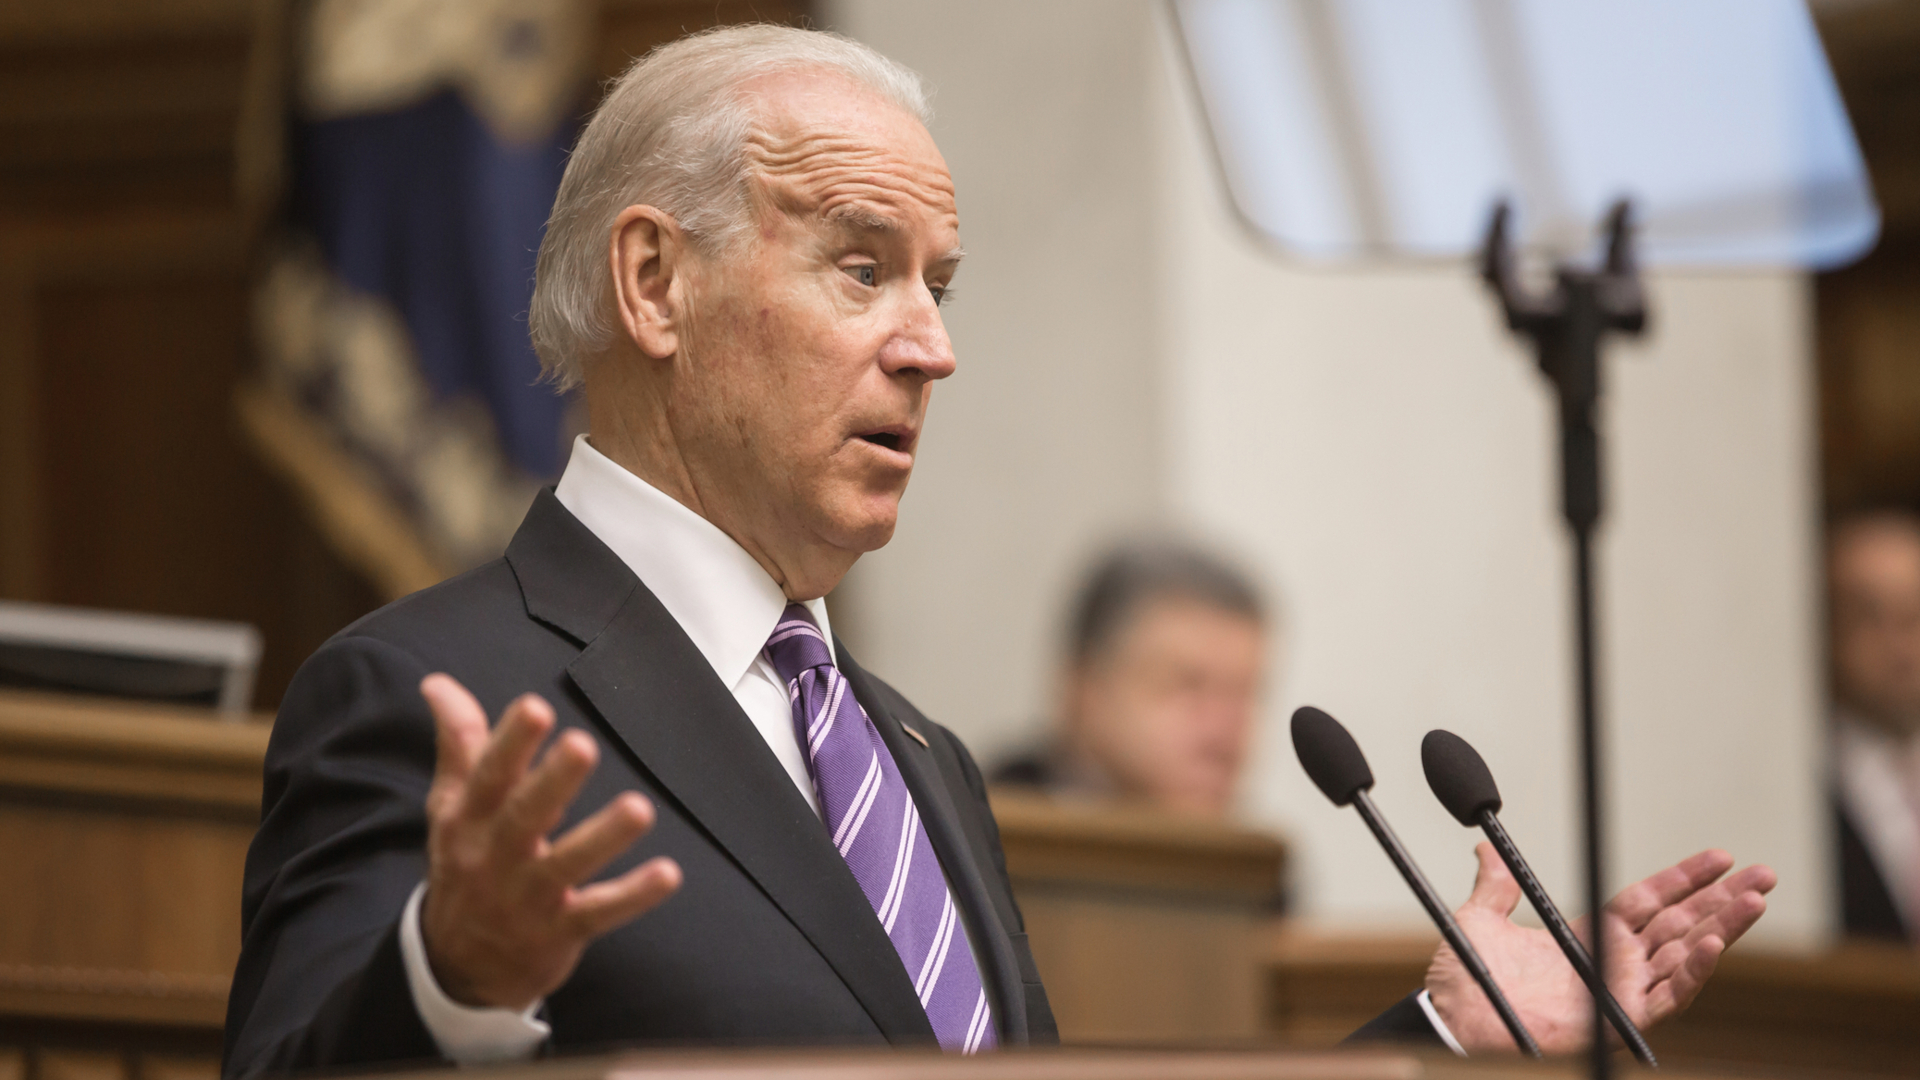 President Biden Nominates Partner from Notorious Union-Busting Law Firm to NLRB